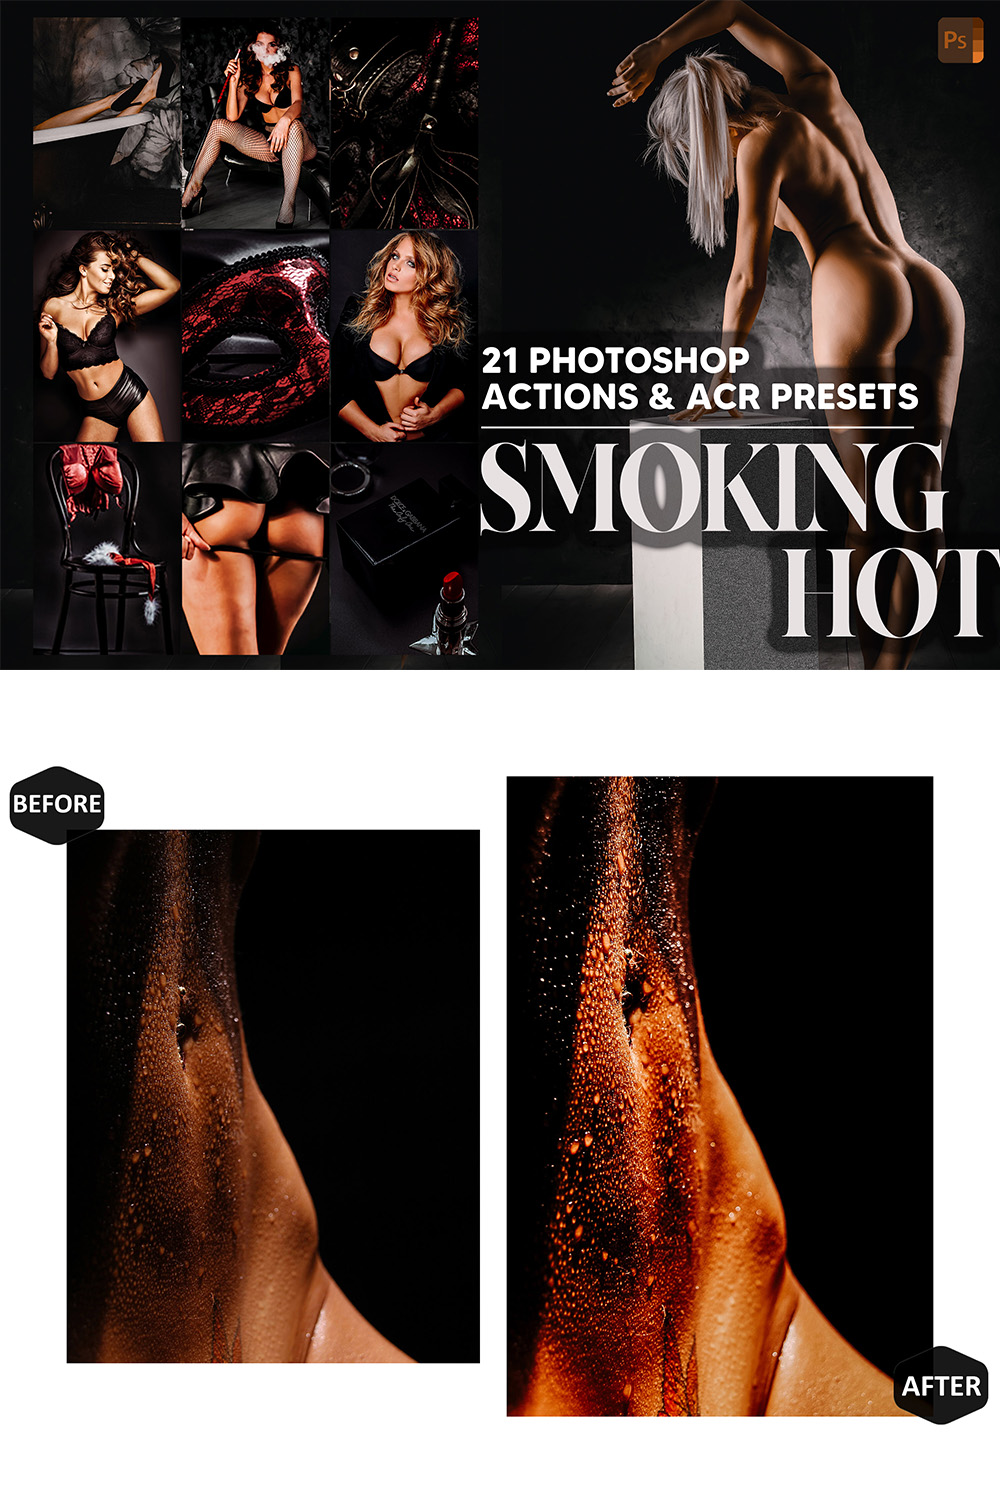 21 Photoshop Actions, Smoking Hot Ps Action, Sexy Sensual ACR Preset, Boudoir Ps Filter, Atn Portrait And Lifestyle Theme Instagram, Blogger pinterest preview image.